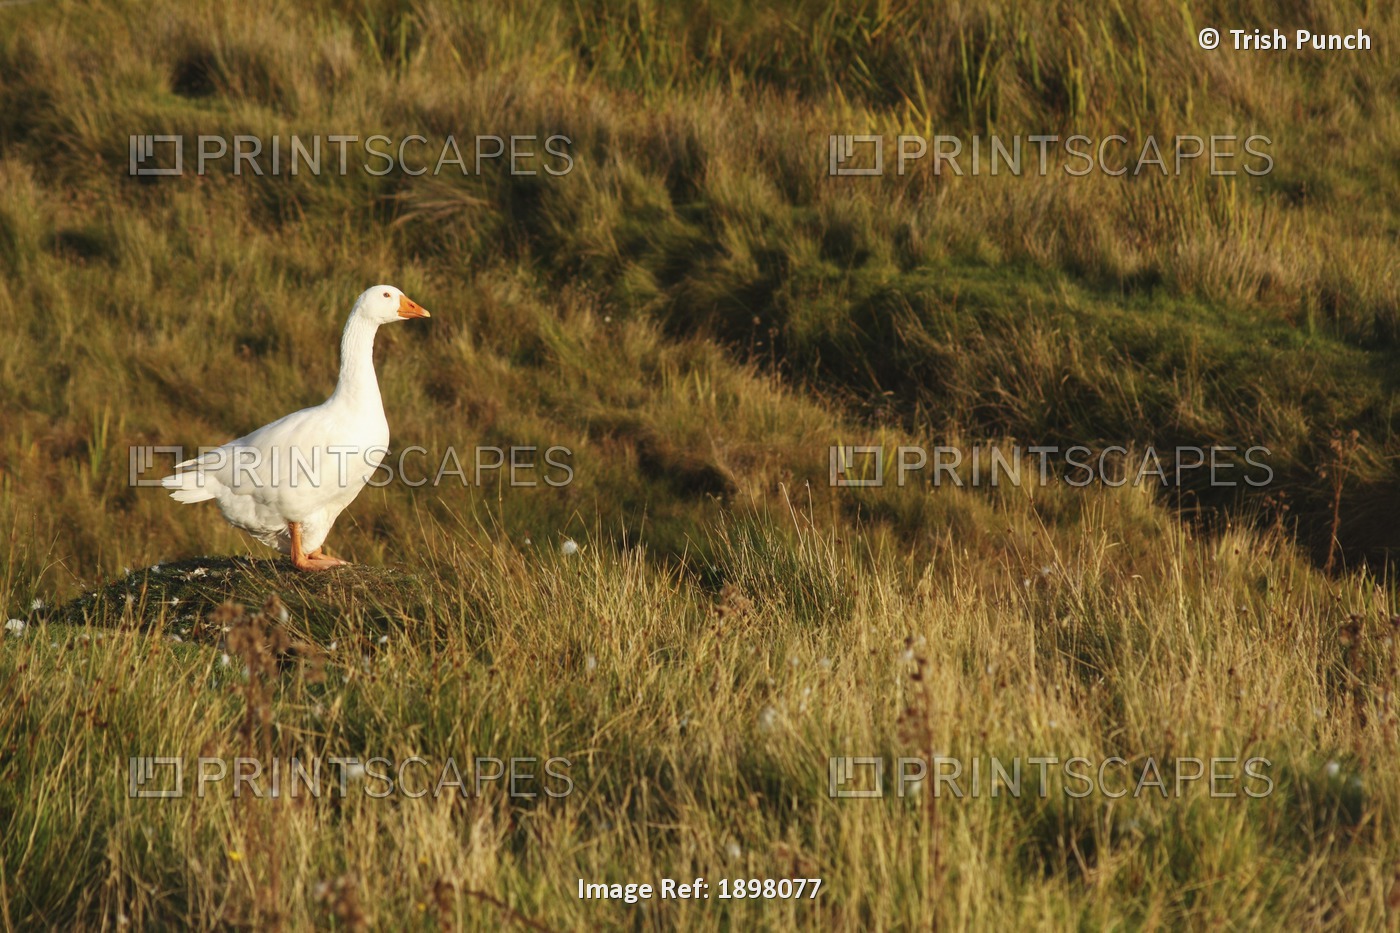 White Goose On Clare Island In The Connacht Region; County Mayo, Ireland